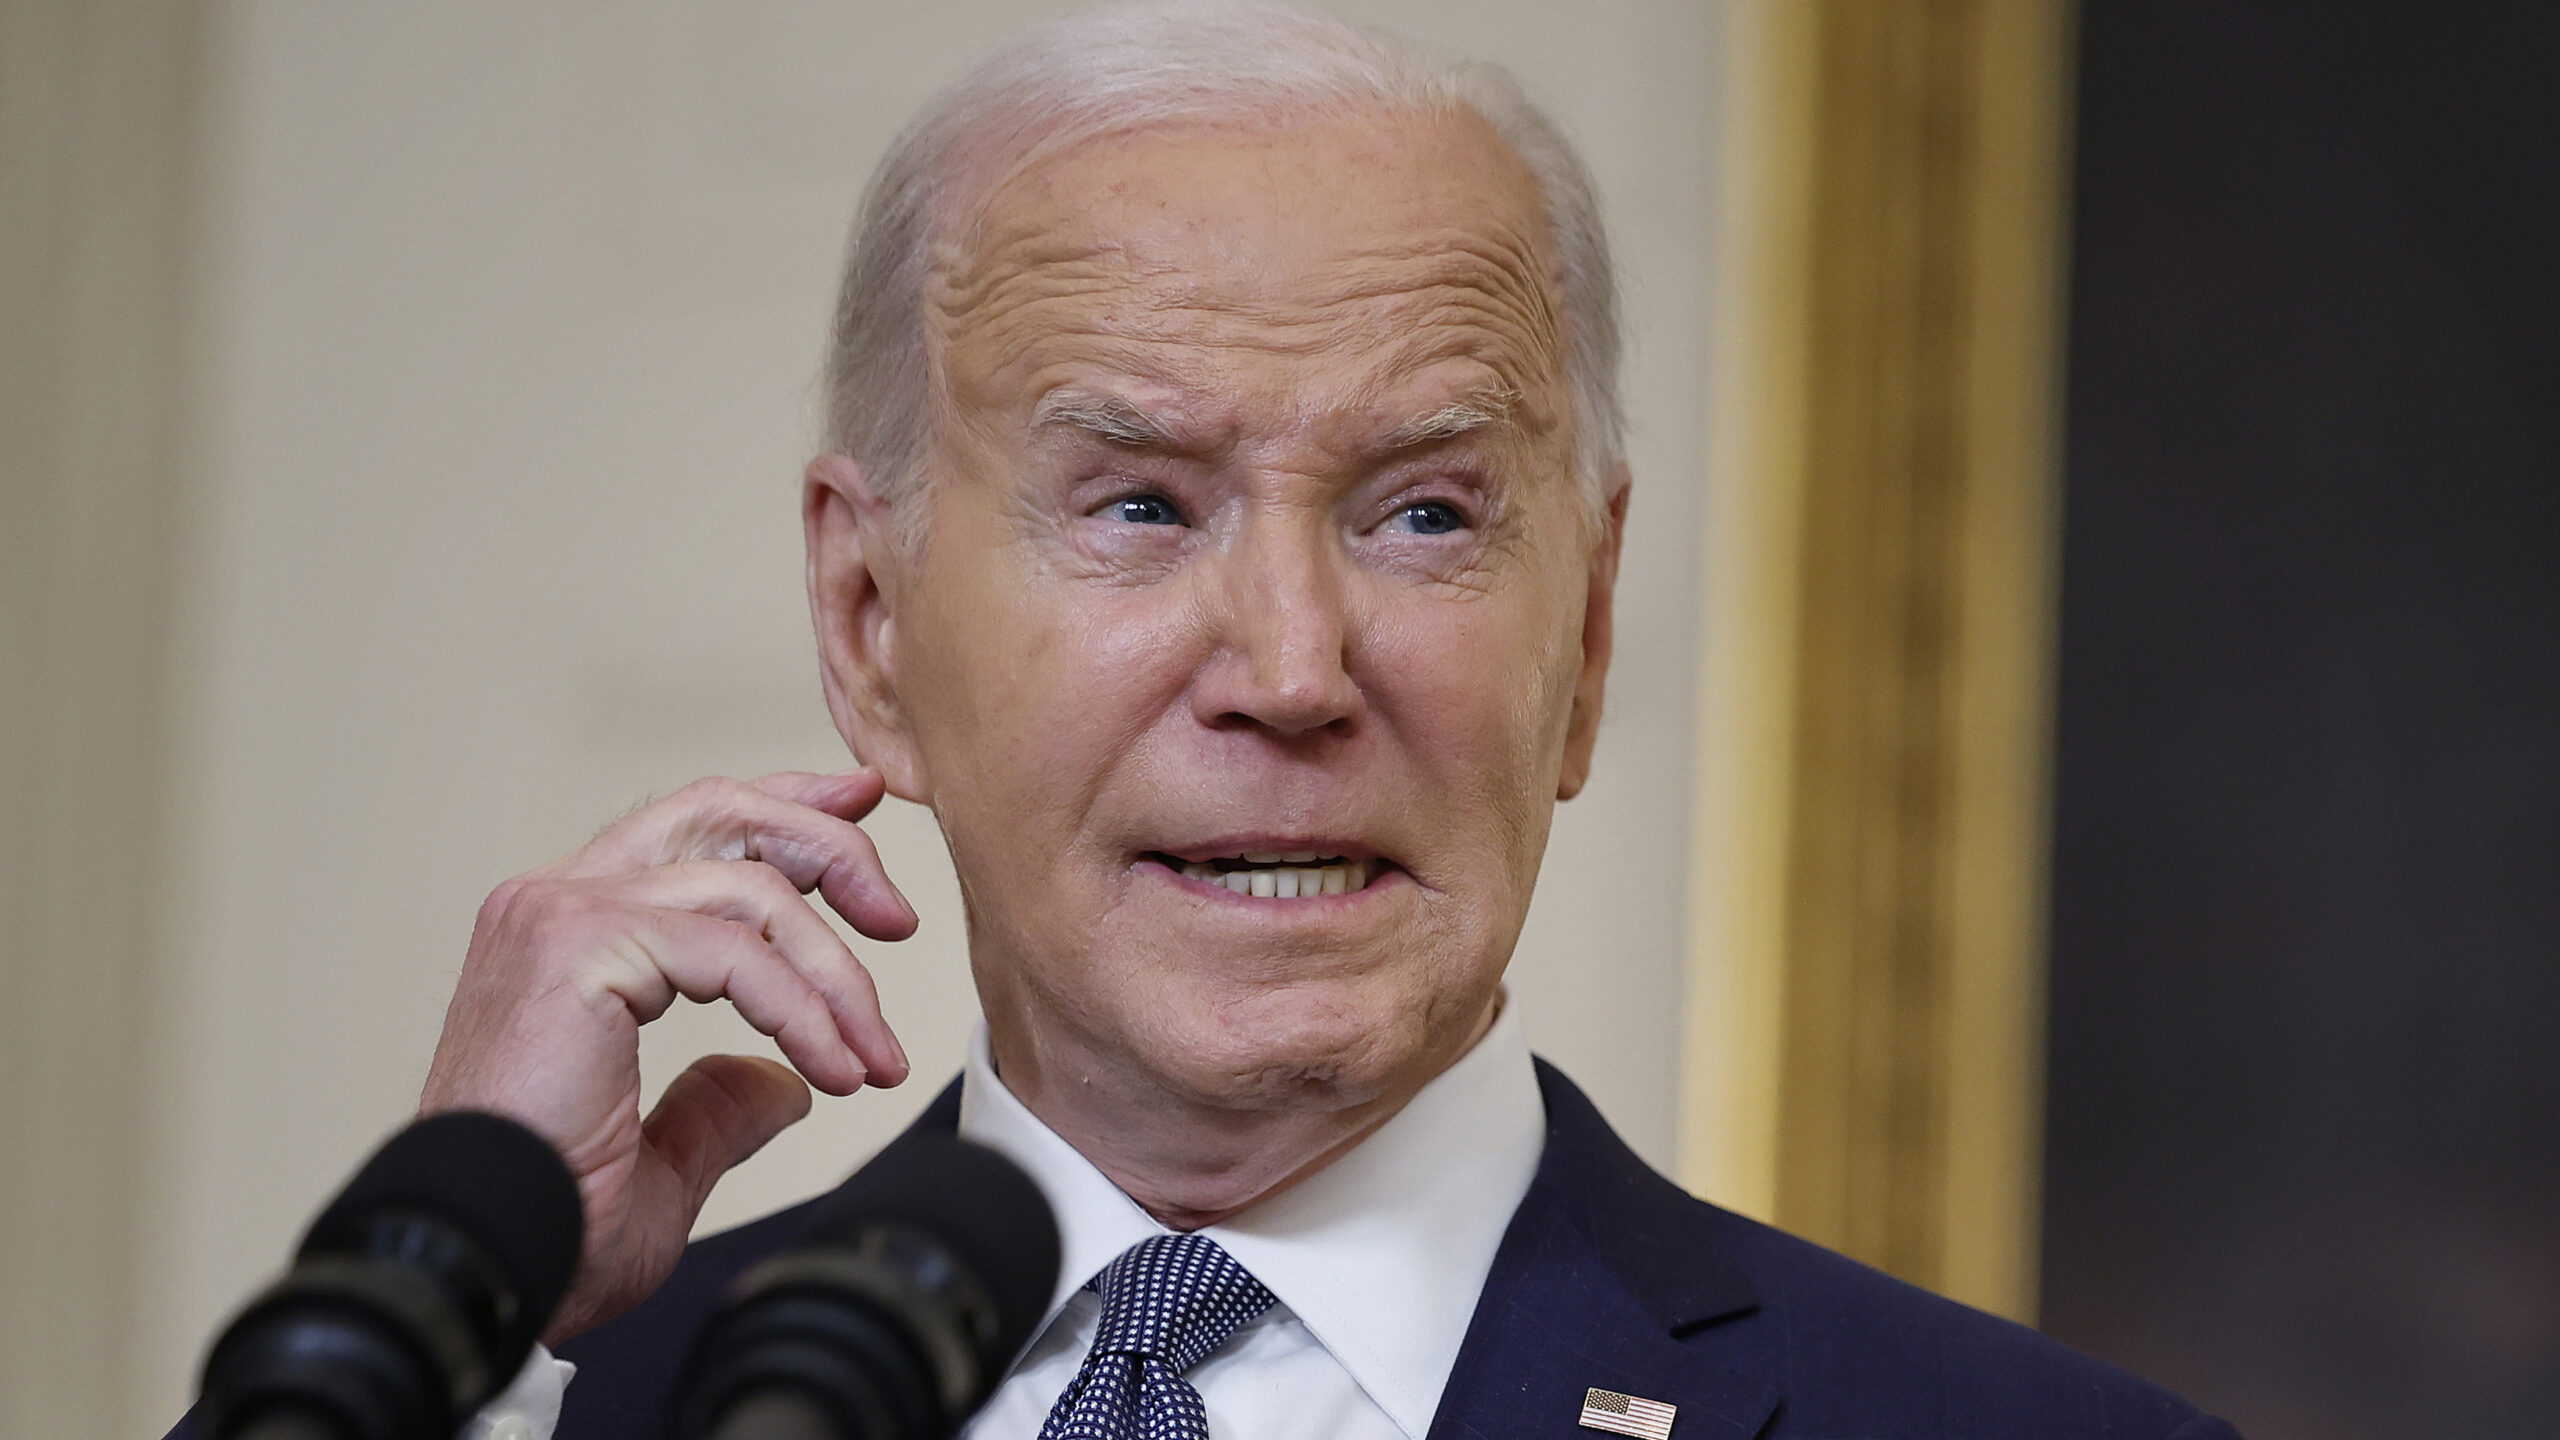 Israel Rejects Biden’s Claim of Proposed Solution to End War